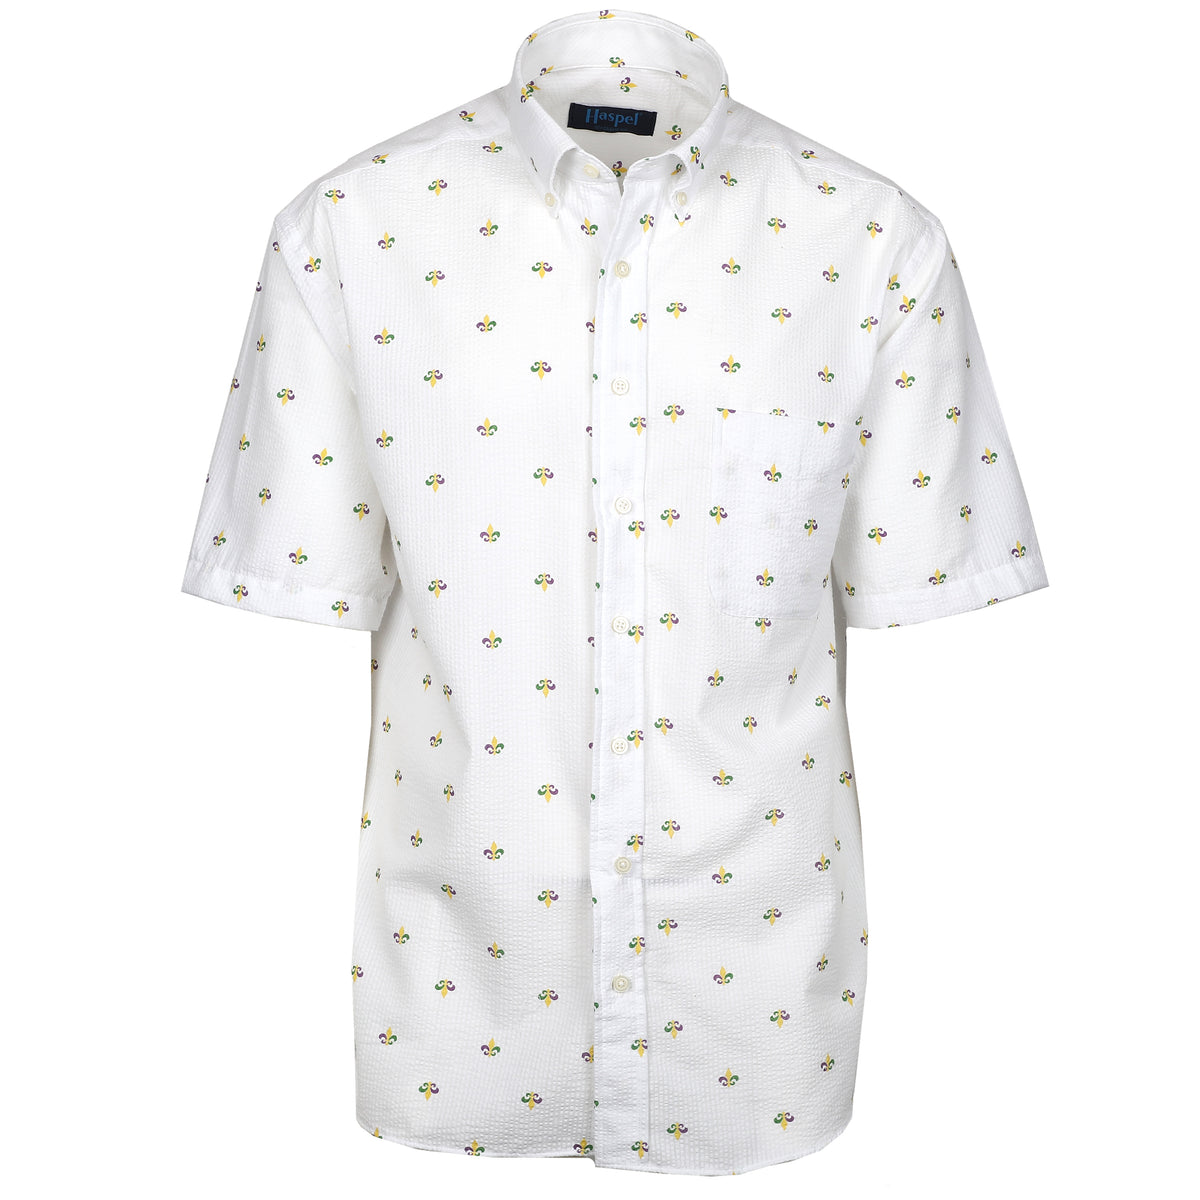 Seersucker your New Orleans style in our gorgeous white seersucker complete with regal purple, gold, &amp; green fleur de lis. Fit for a king, because you are one. Subtle, lightweight, and a texture they begs a second look.  100% Cotton Seersucker • Button Down Collar • Short Sleeve • Chest Pocket • Machine Washable • Made in Italy